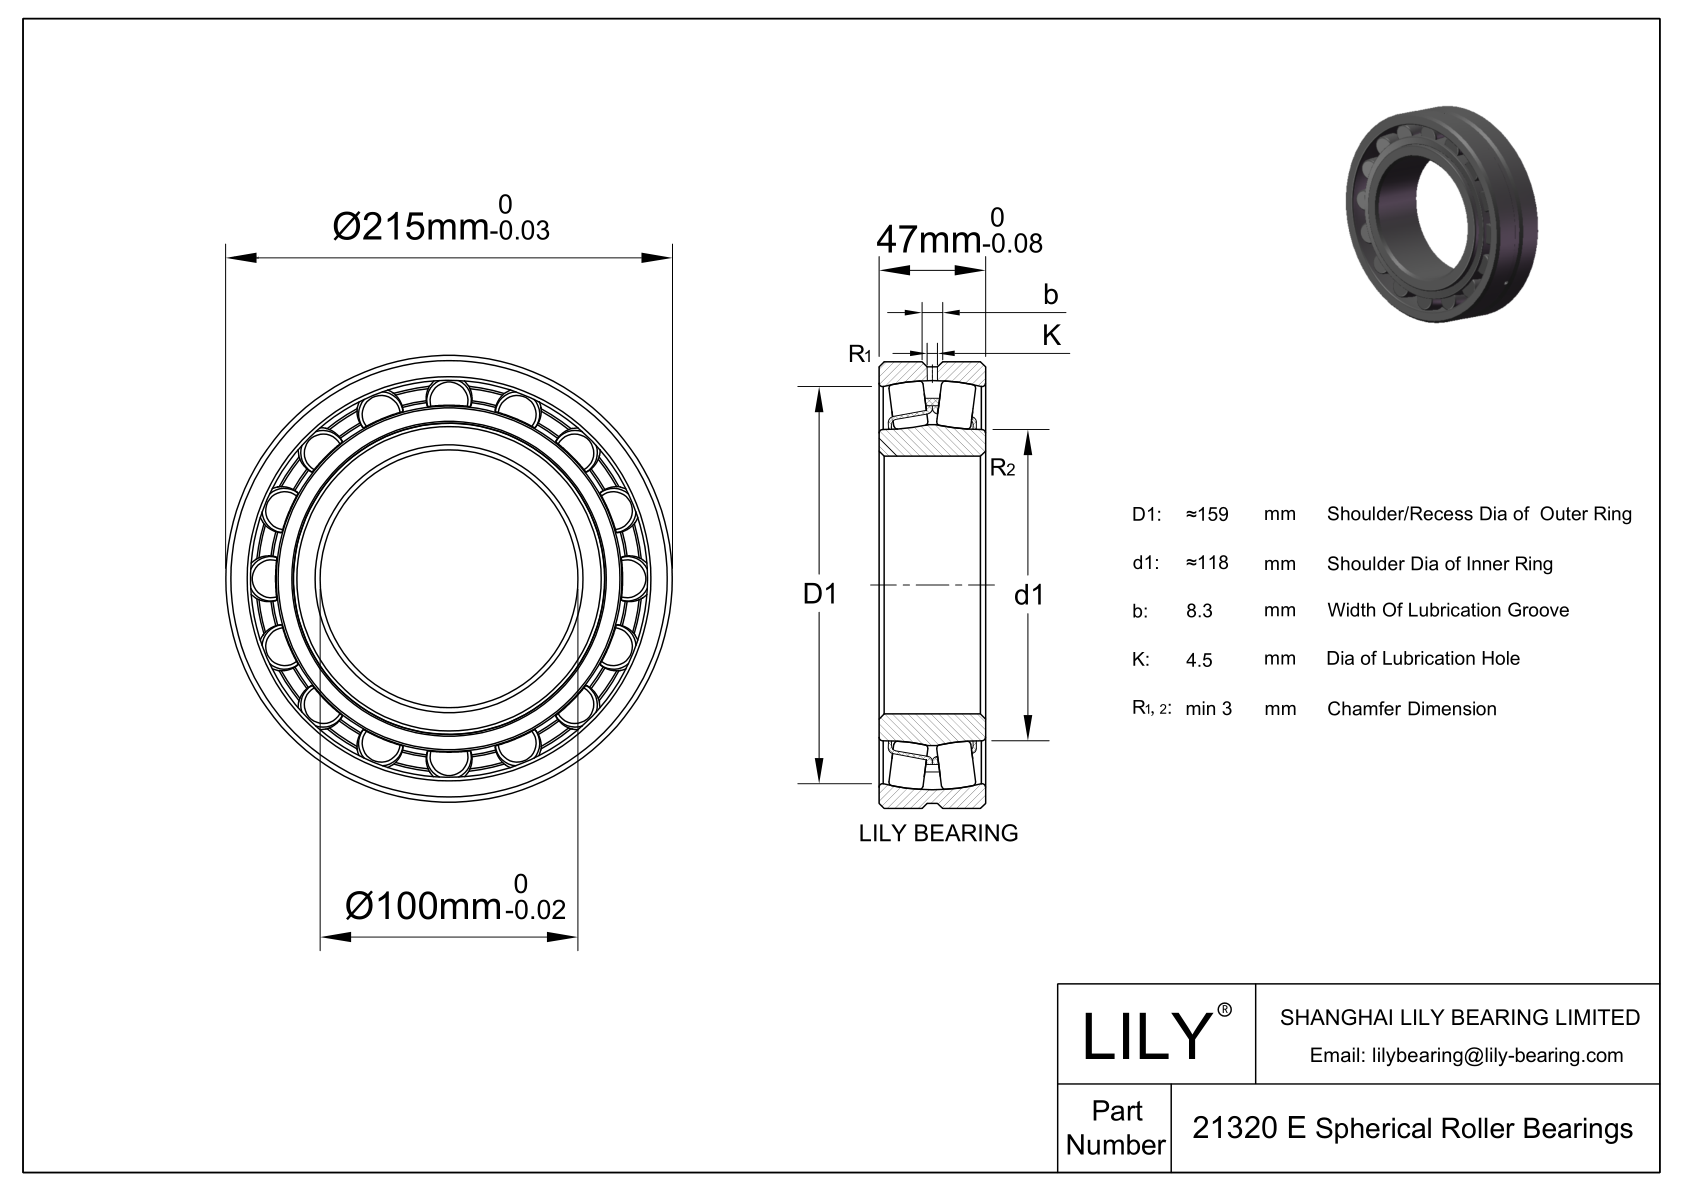 21320 E Double Row Spherical Roller Bearing cad drawing